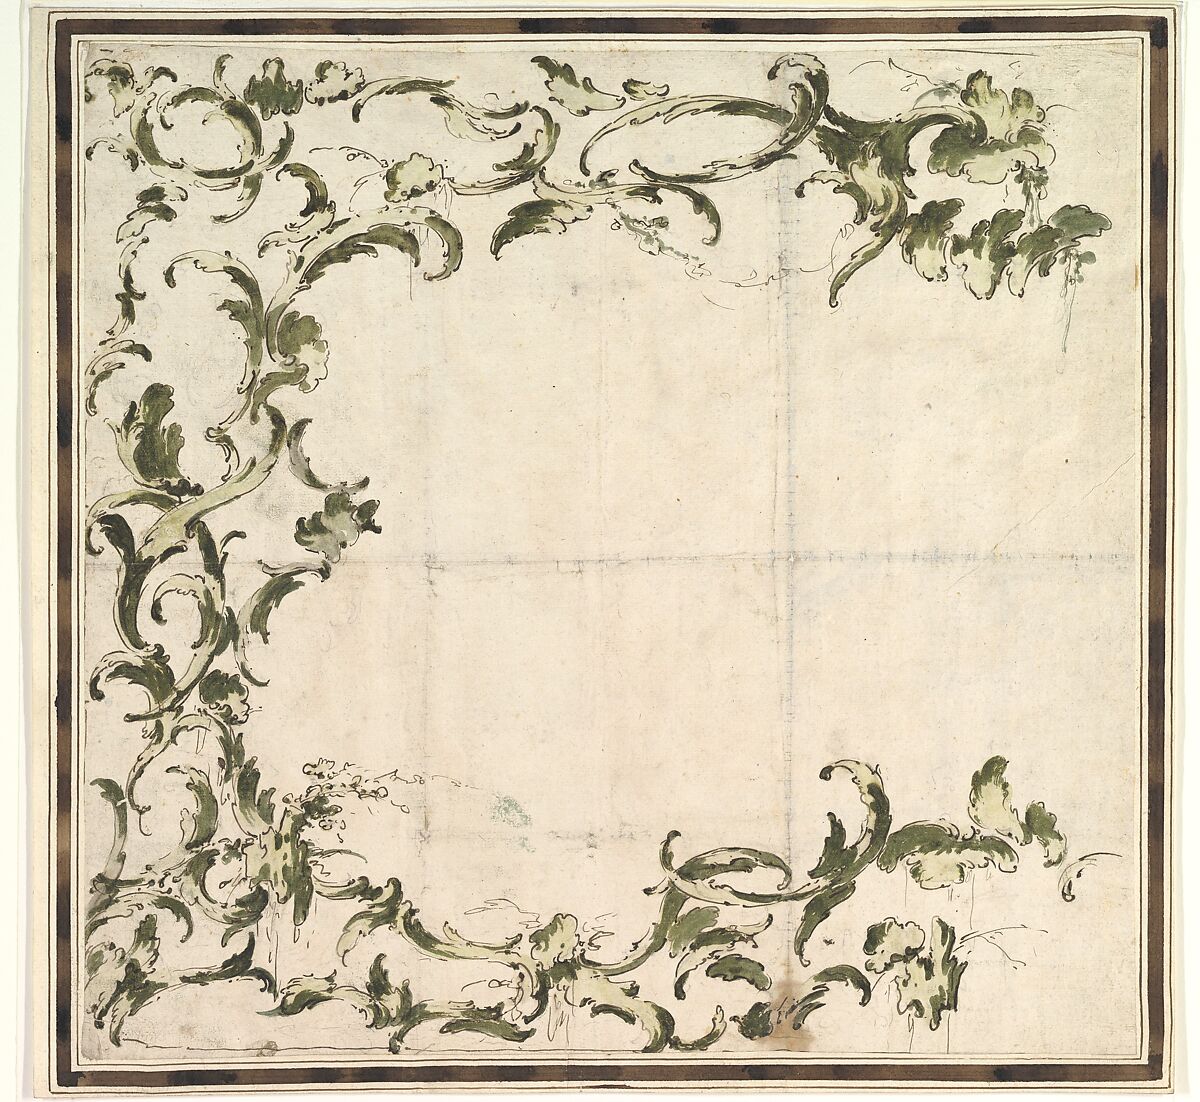 Design for a Framing Motif, Francesco Guardi  Italian, Pen and brown ink, brush with light and dark green watercolor (?), over graphite or lead or black chalk